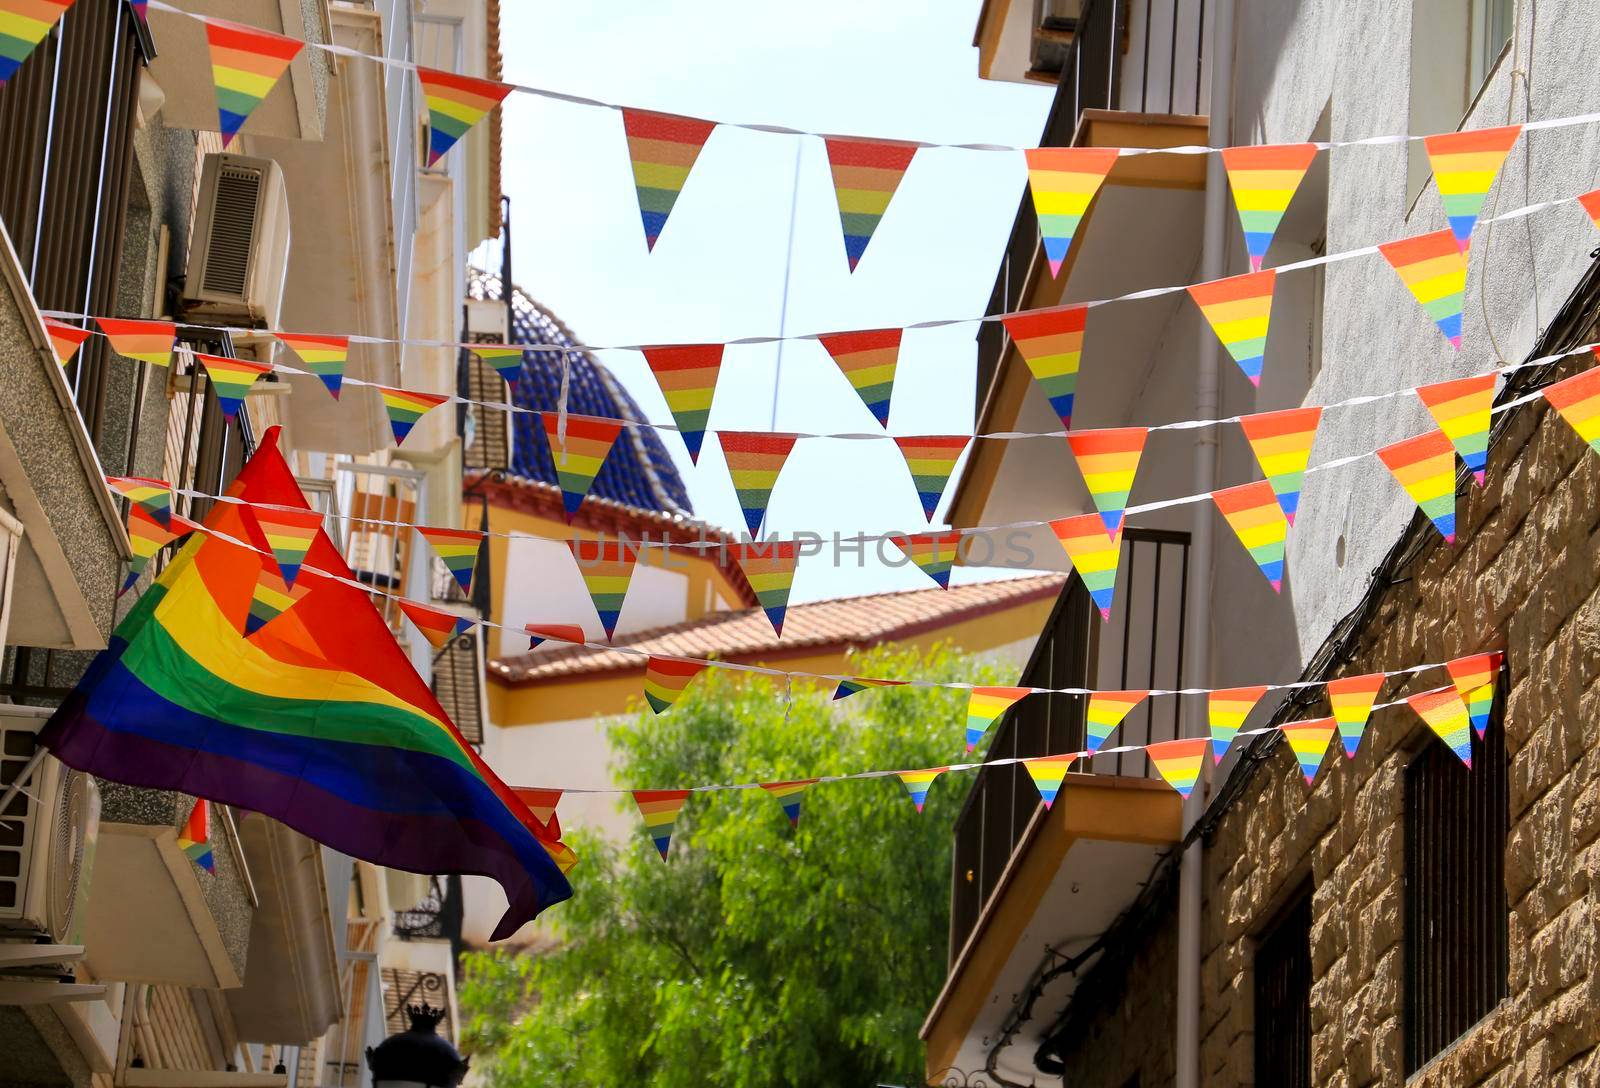 Streets and facades adorned with rainbow flags in Benidorm by soniabonet